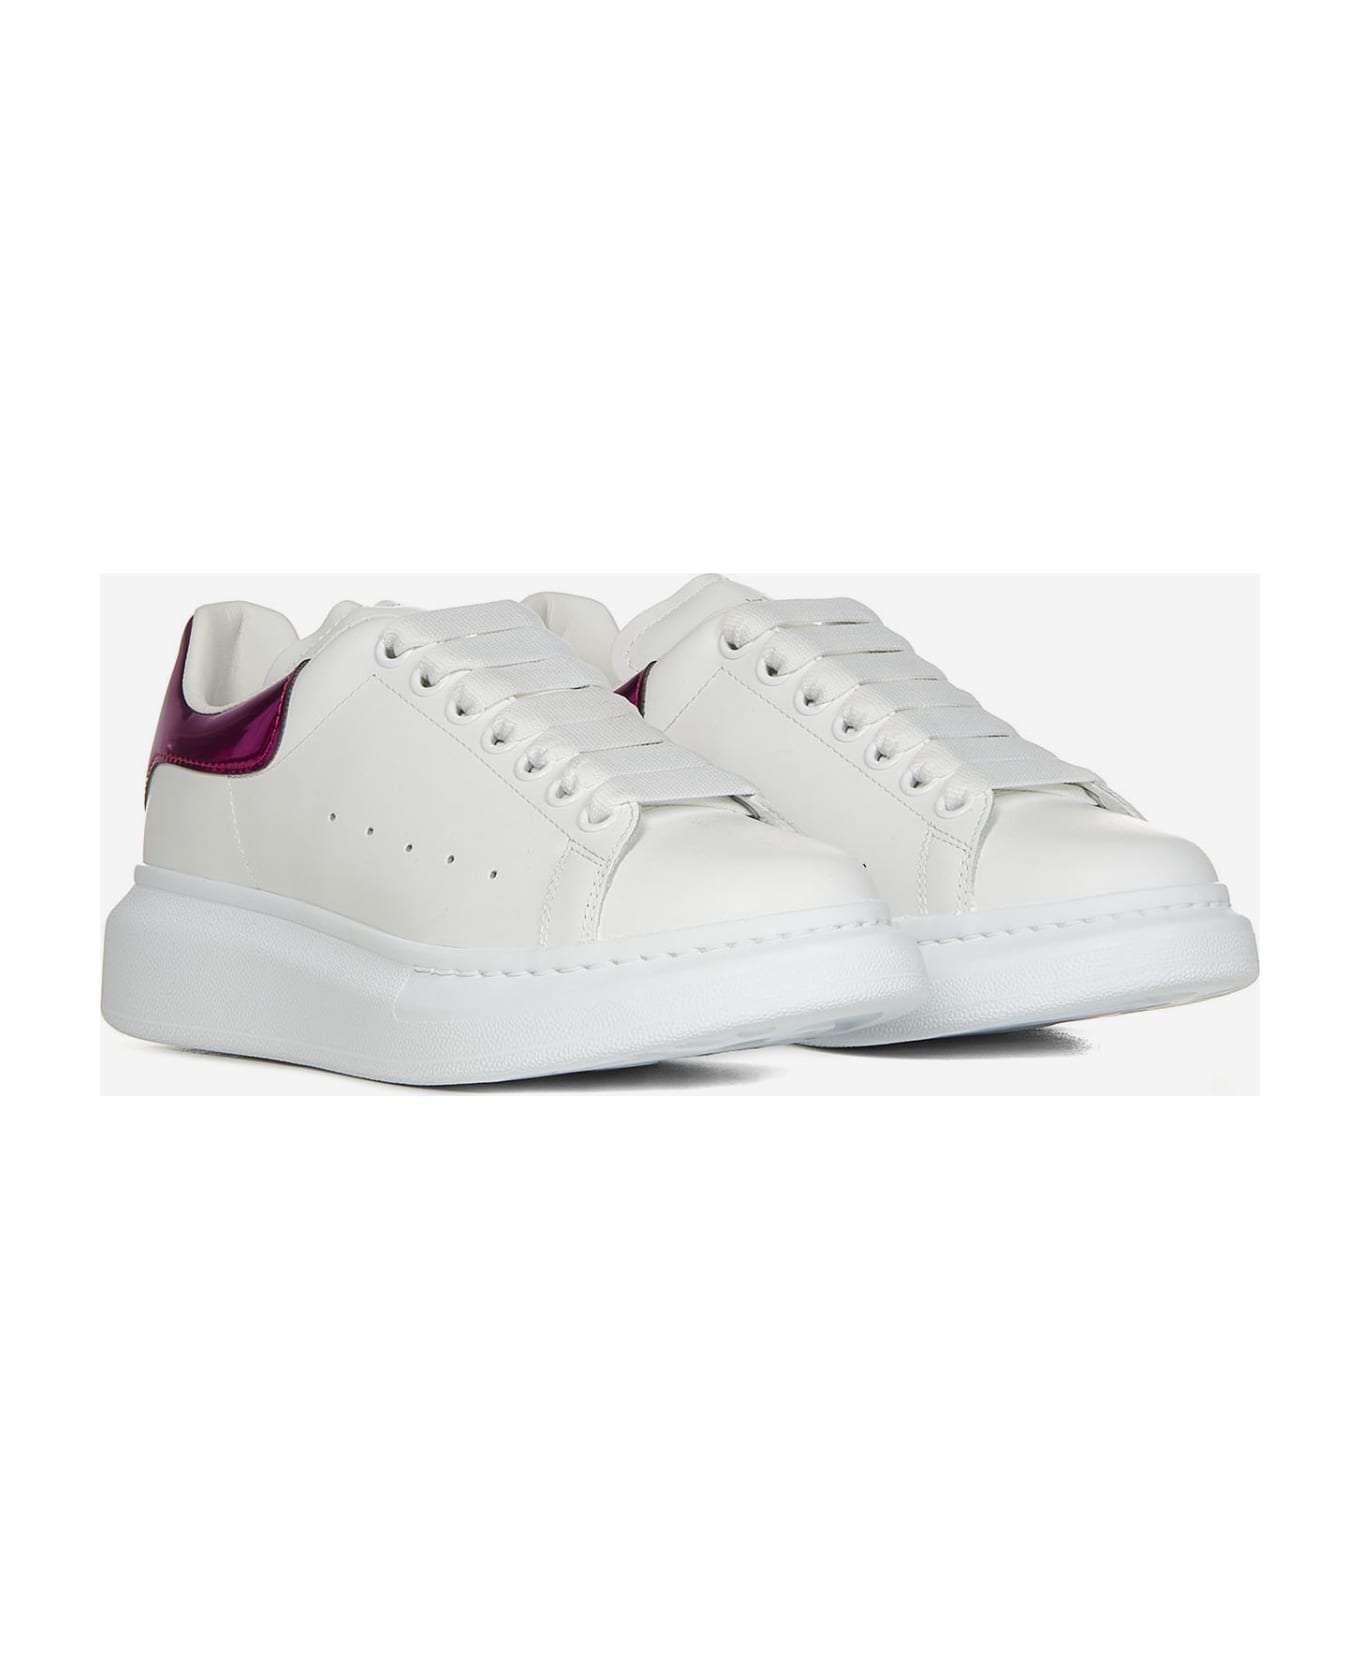 Alexander McQueen White Sneakers With Platform And Metallic Fuchsia Heel Tab In Leather Woman Alexander Mcqueen - White スニーカー